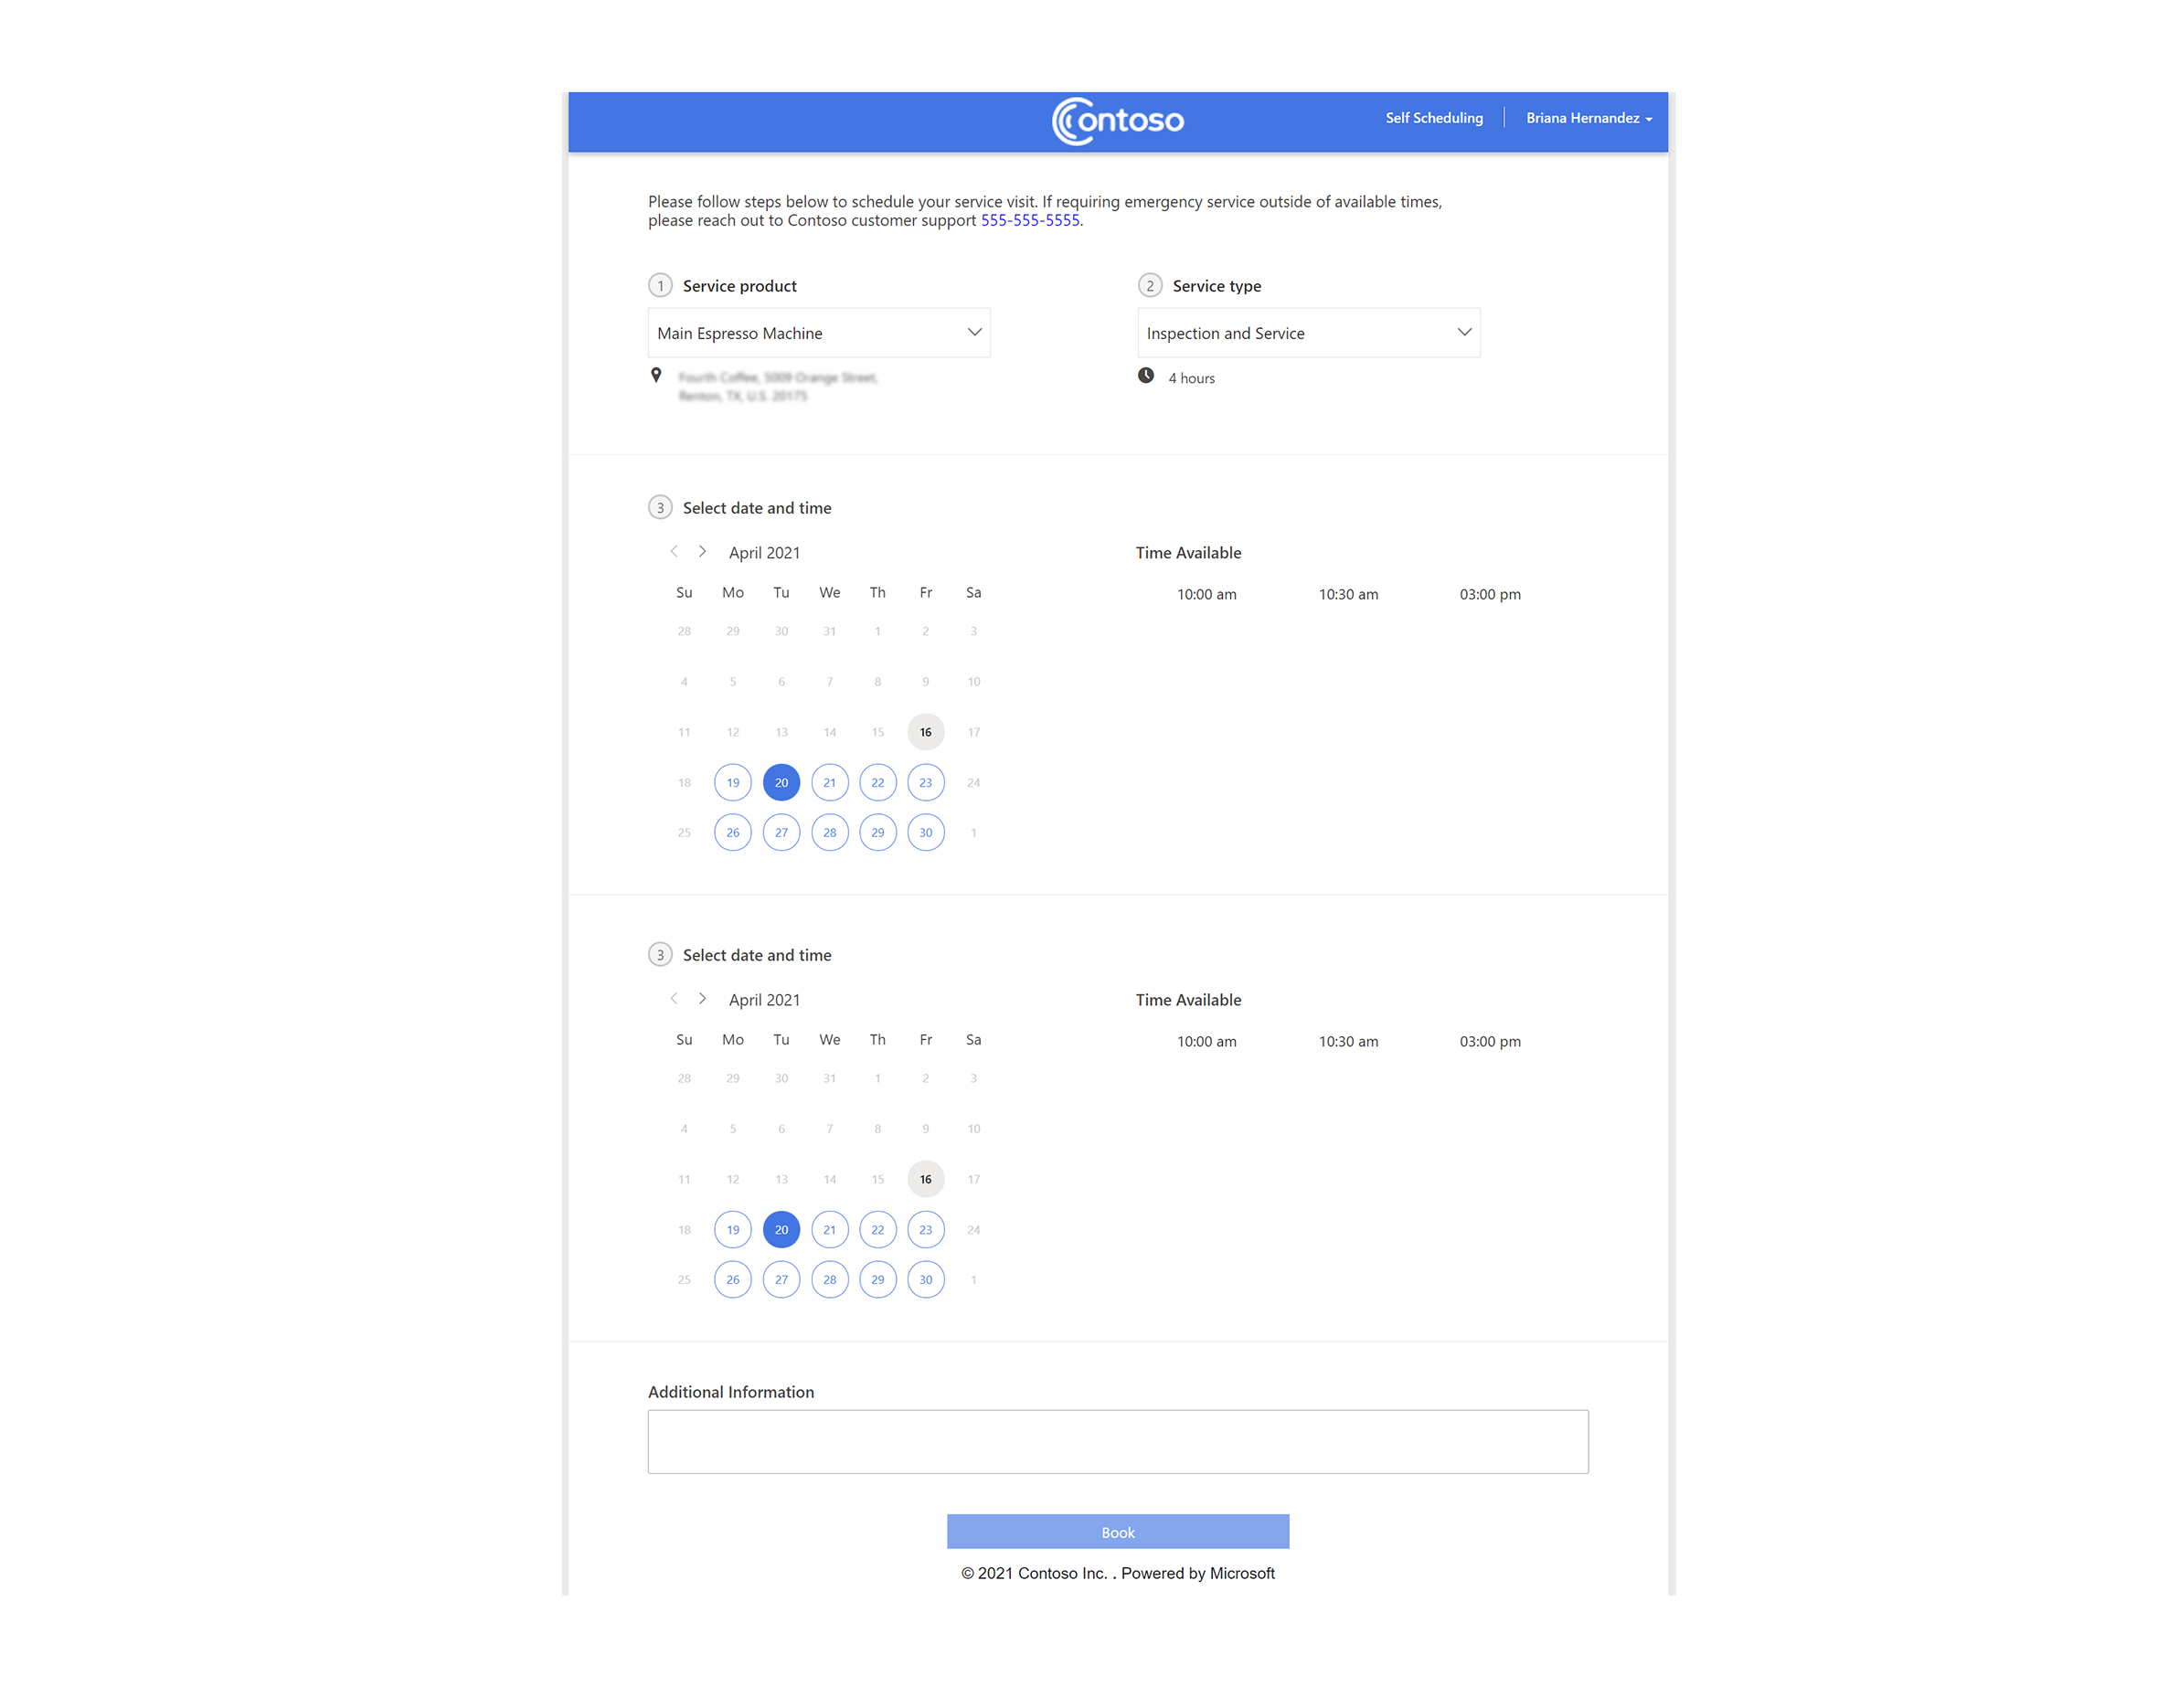 The customer portal, showing the full self-scheduling experience.